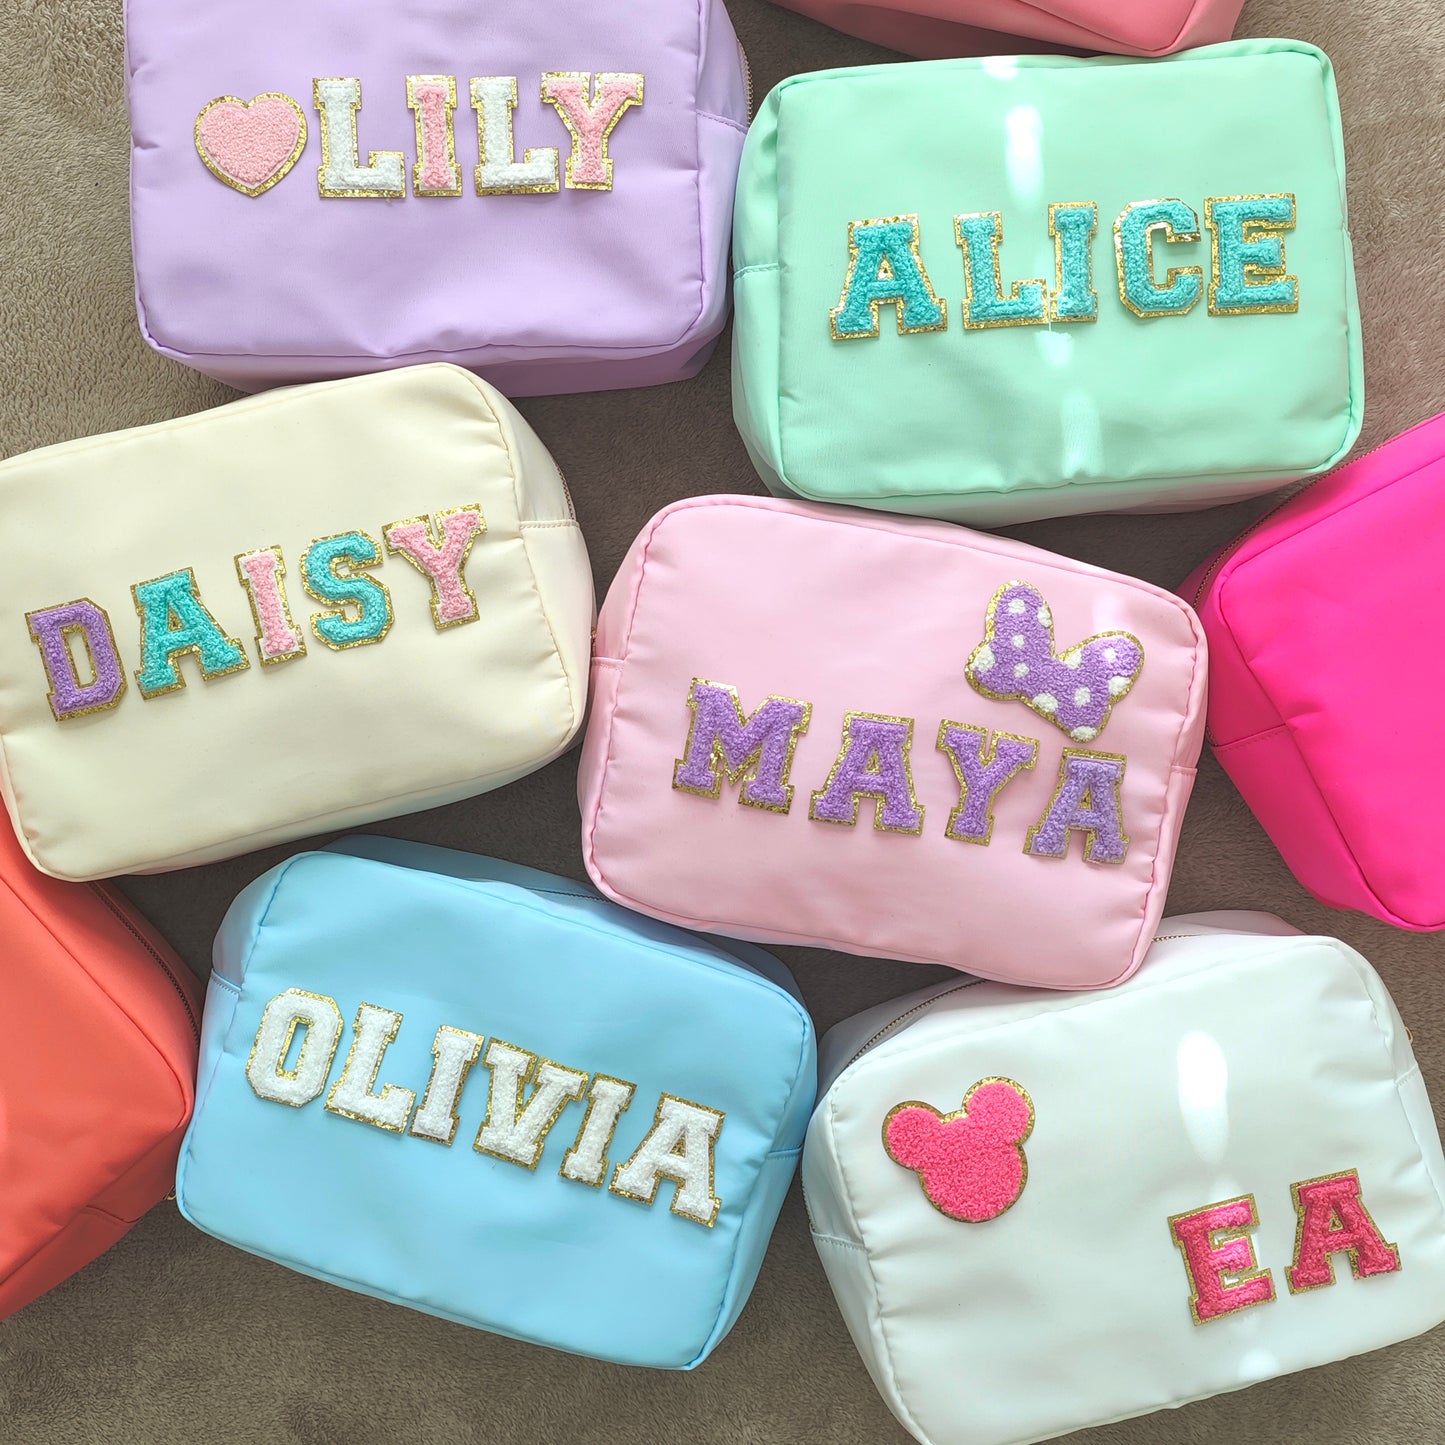 Sewn Patches XL Cosmetic Bag Personalized Makeup Nylon Bag Custom Pouch Chenille Patch X-Large Travel Case Large Toiletry spf Bag Bridesmaid Gift